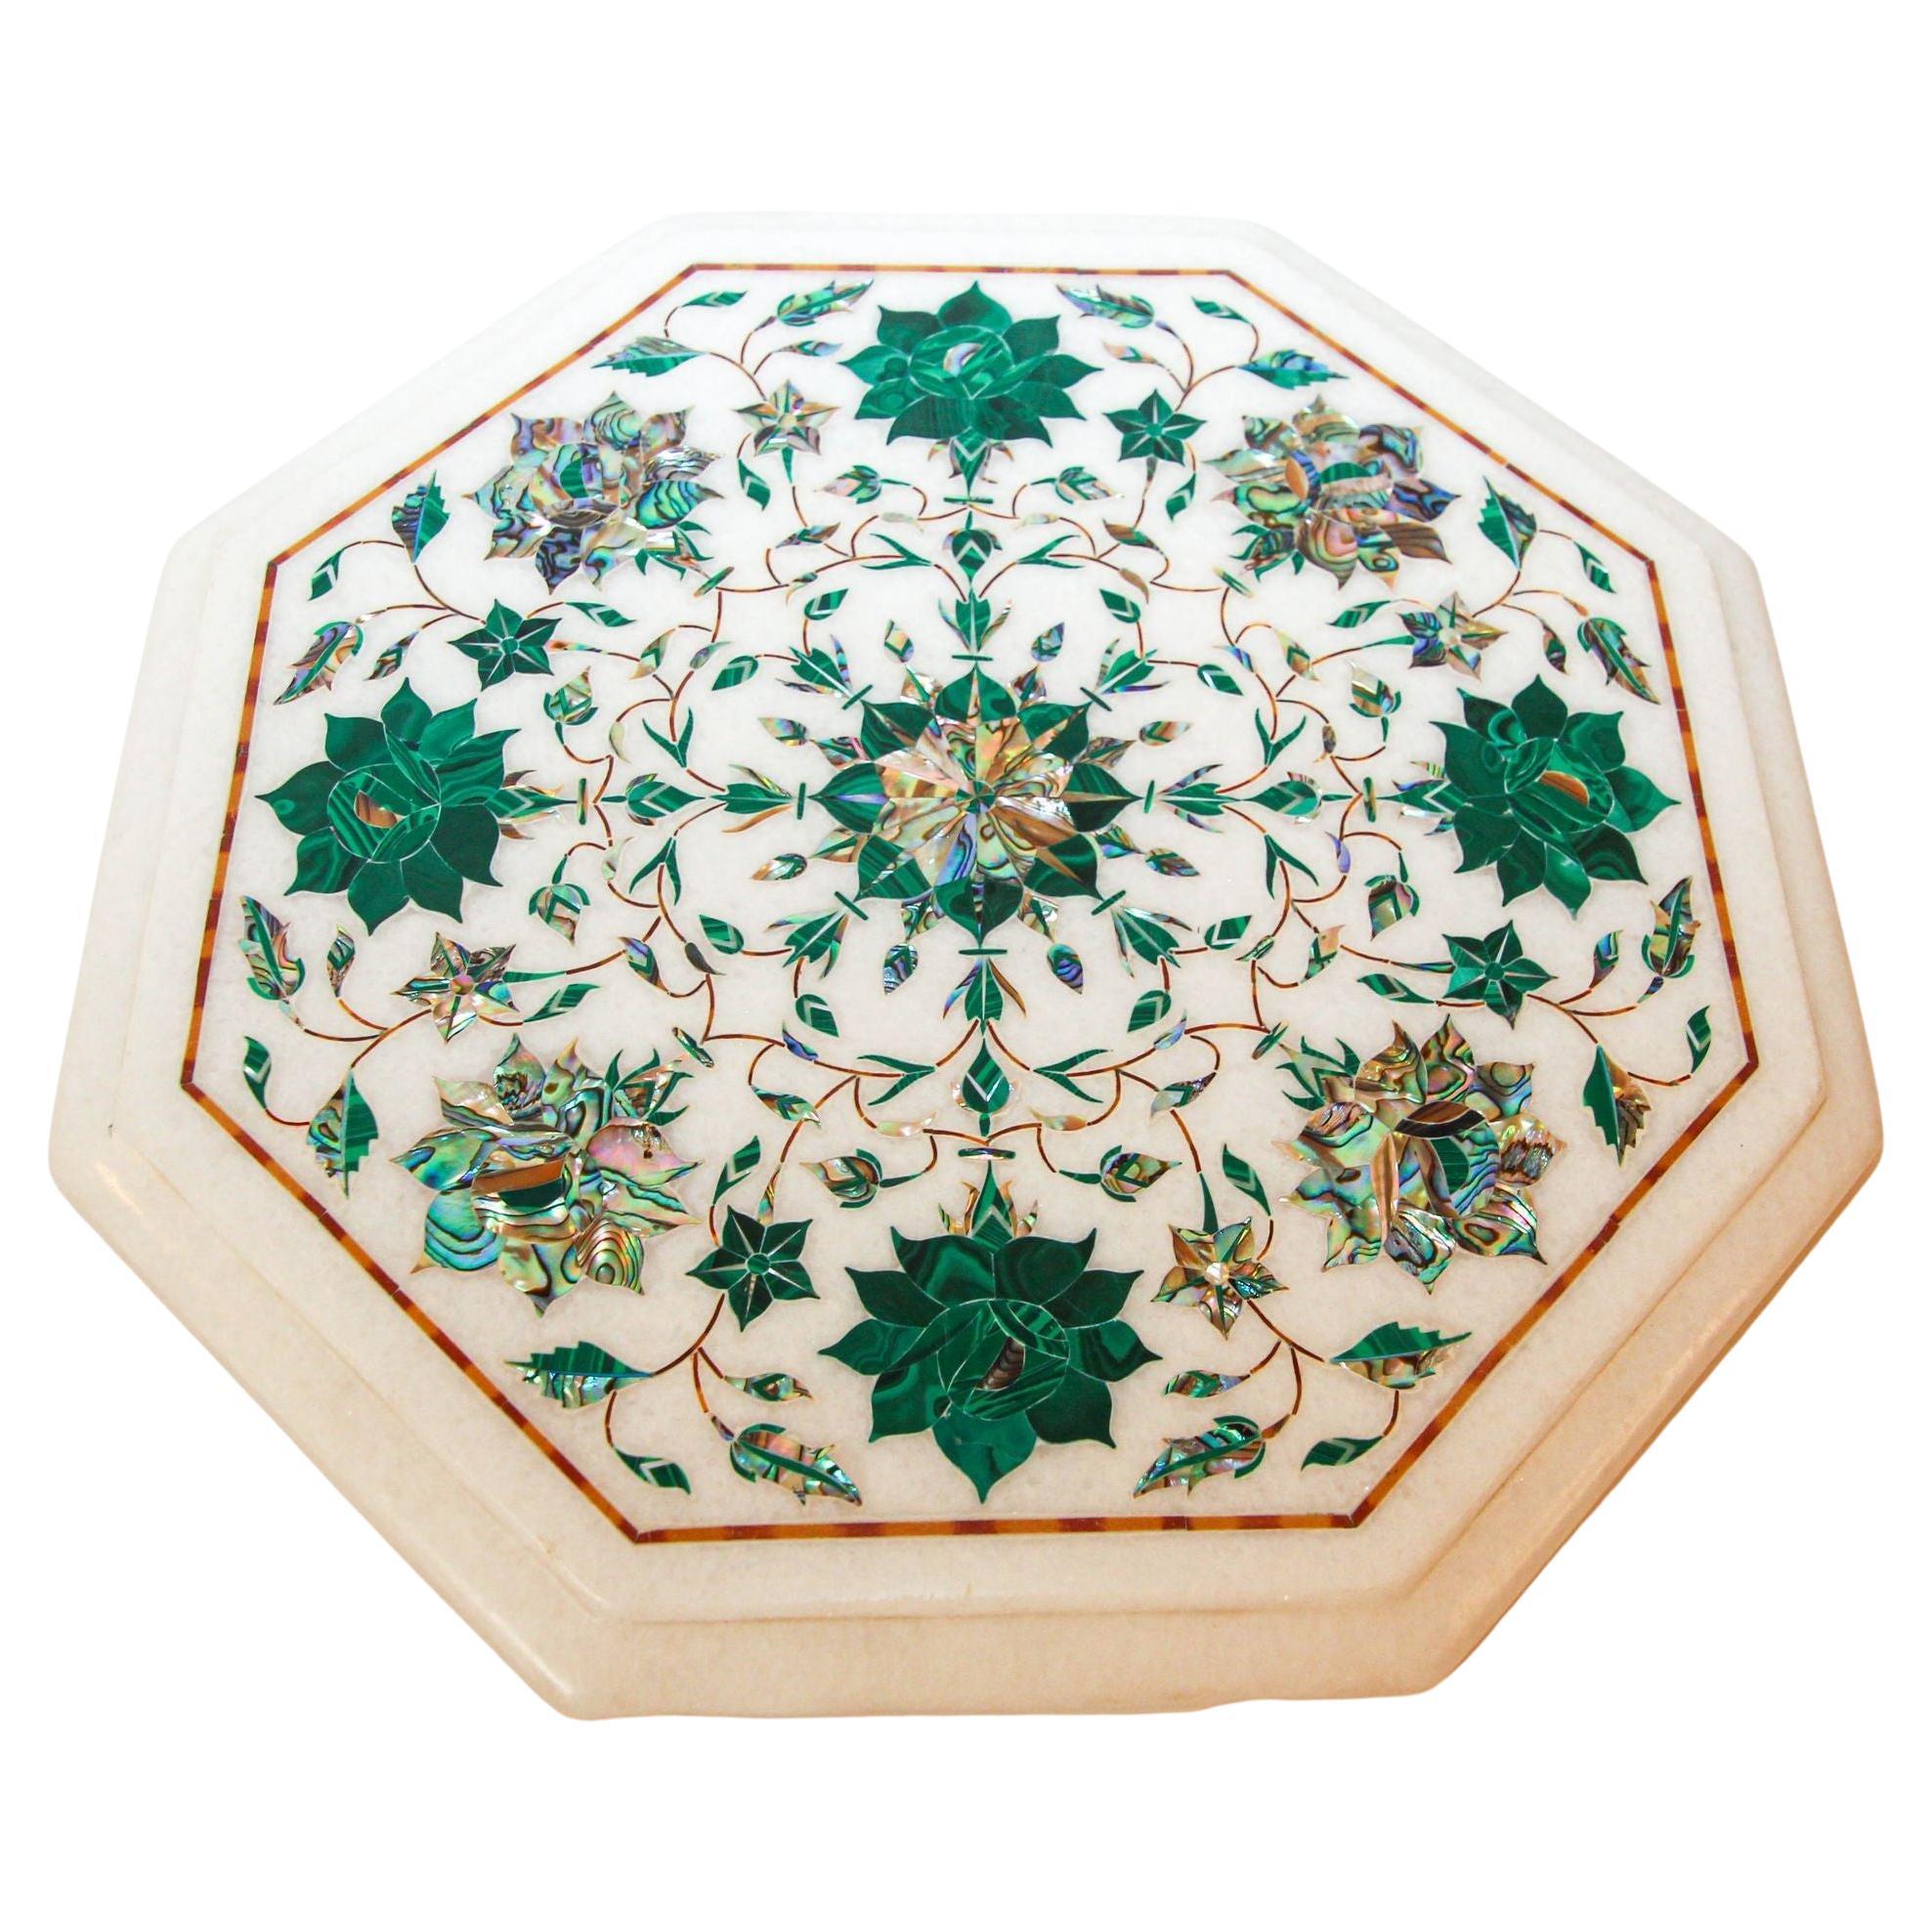 Pietra Dura White Mosaic Octagonal Inlaid Marble Top Handcrafted Agra India 1980 For Sale